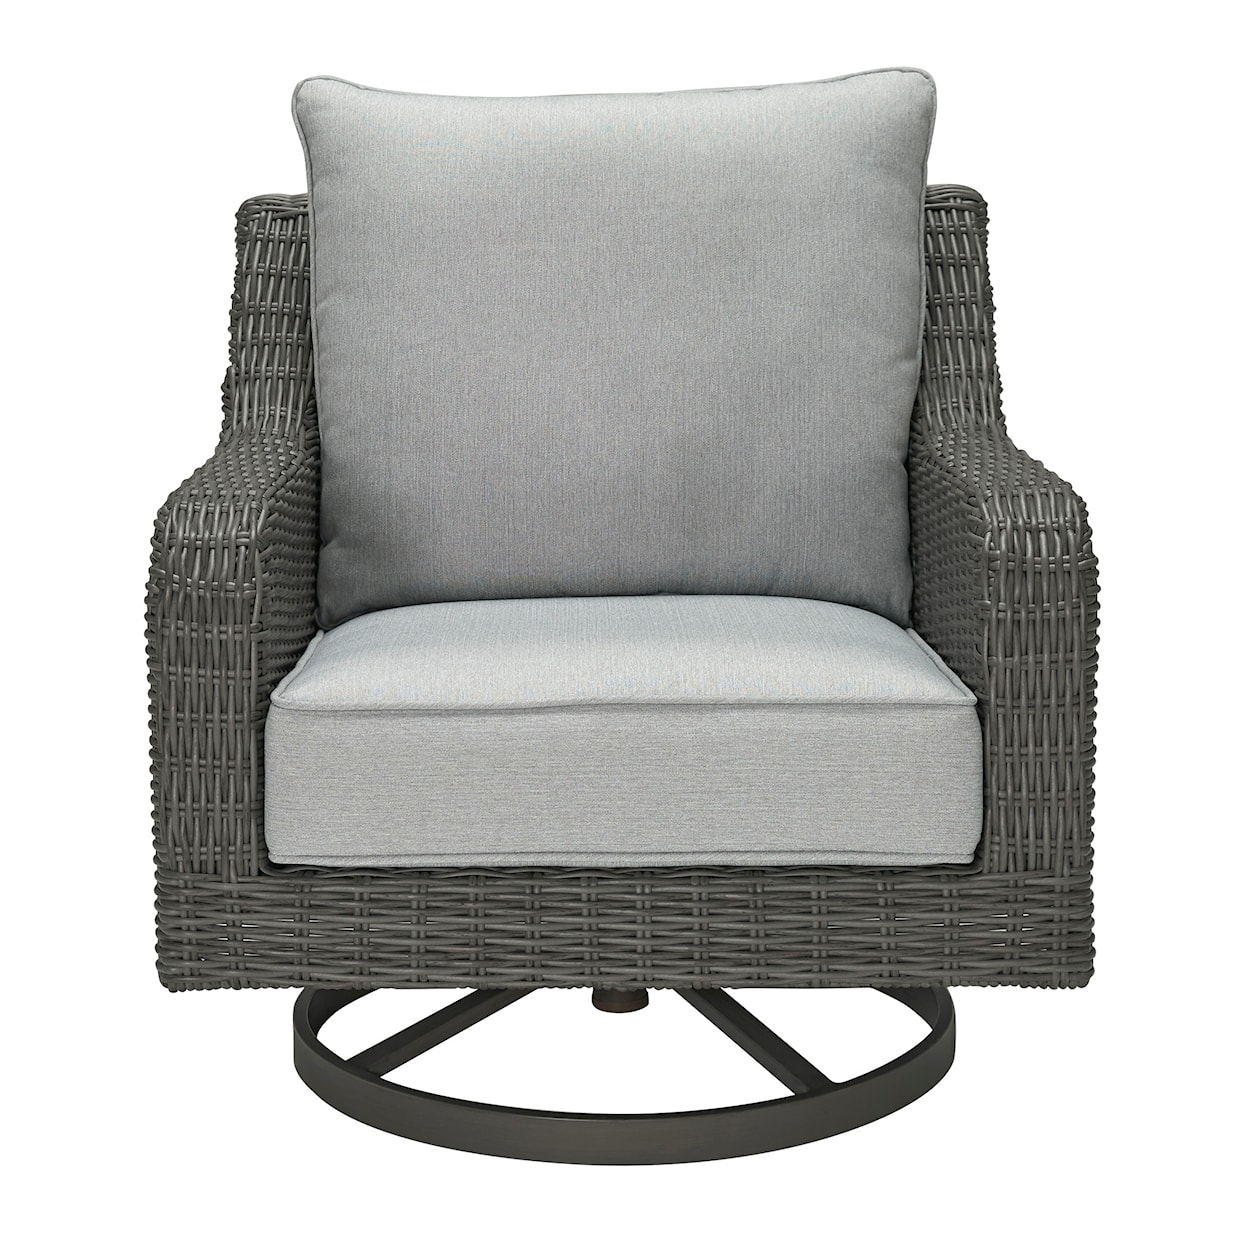 Signature Design Elite Park Outdoor Swivel Lounge Chair with Cushion